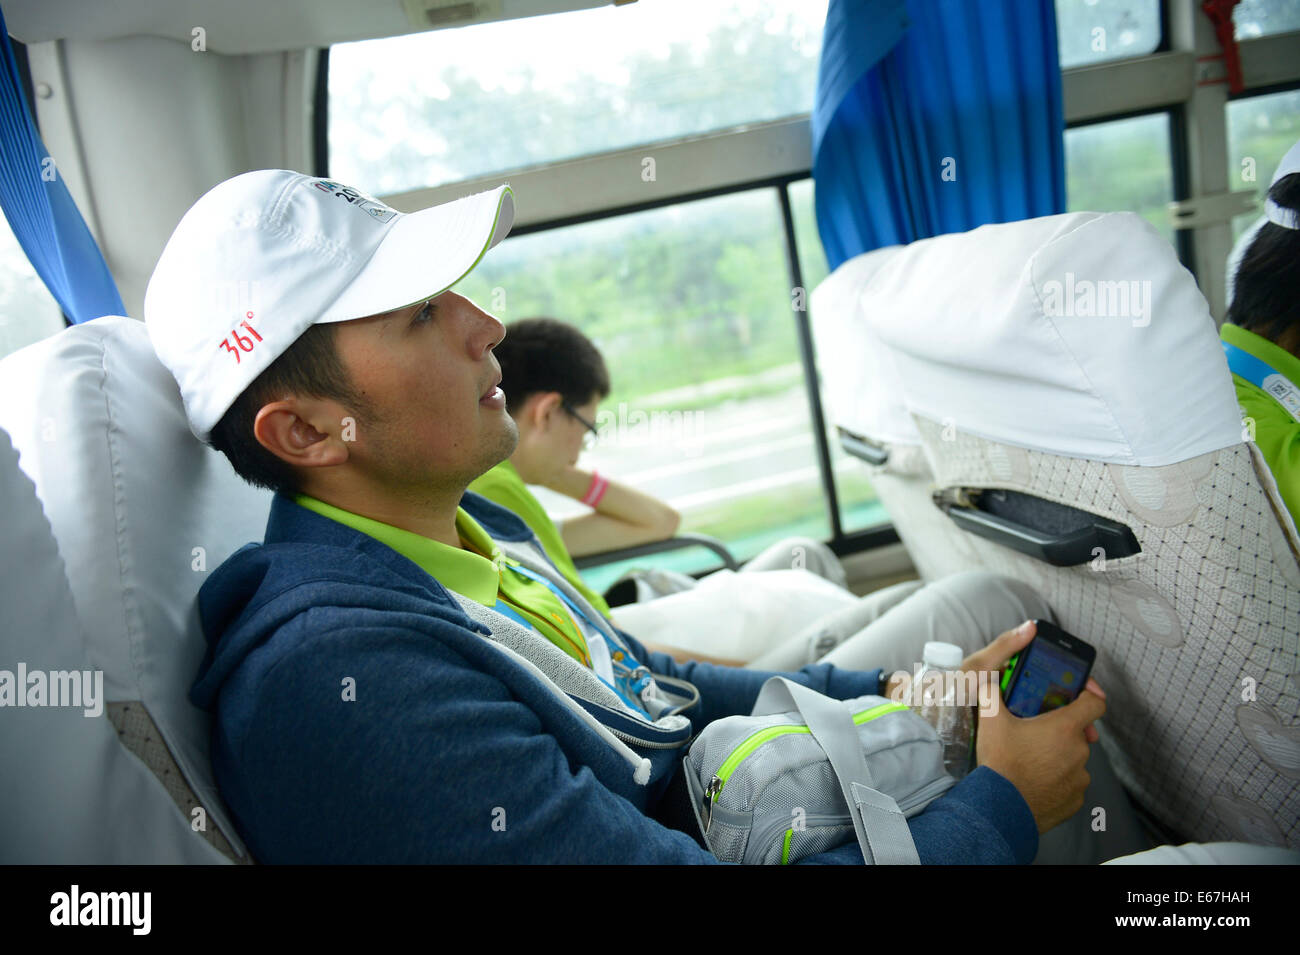 (140817) -- NANJING, Aug. 17, 2014 (Xinhua) -- Medeu Askhatuly takes the shuttle bus back to school after work during Nanjing 2014 Youth Olympic Games on Aug. 17, 2014.       21-year-old Medeu Askhatuly from Kazahkstan works as a volunteer of language service for cycling event during the Nanjing 2014 Youth Olympic Games. He is a senior student majoring in International Economics and Trade in Nanjing University of Information Science and Technology and is fluent in Kazakh, Russian, English and Chinese. He came to China with his father when he was a child and became fascinated by Chinese culture Stock Photo